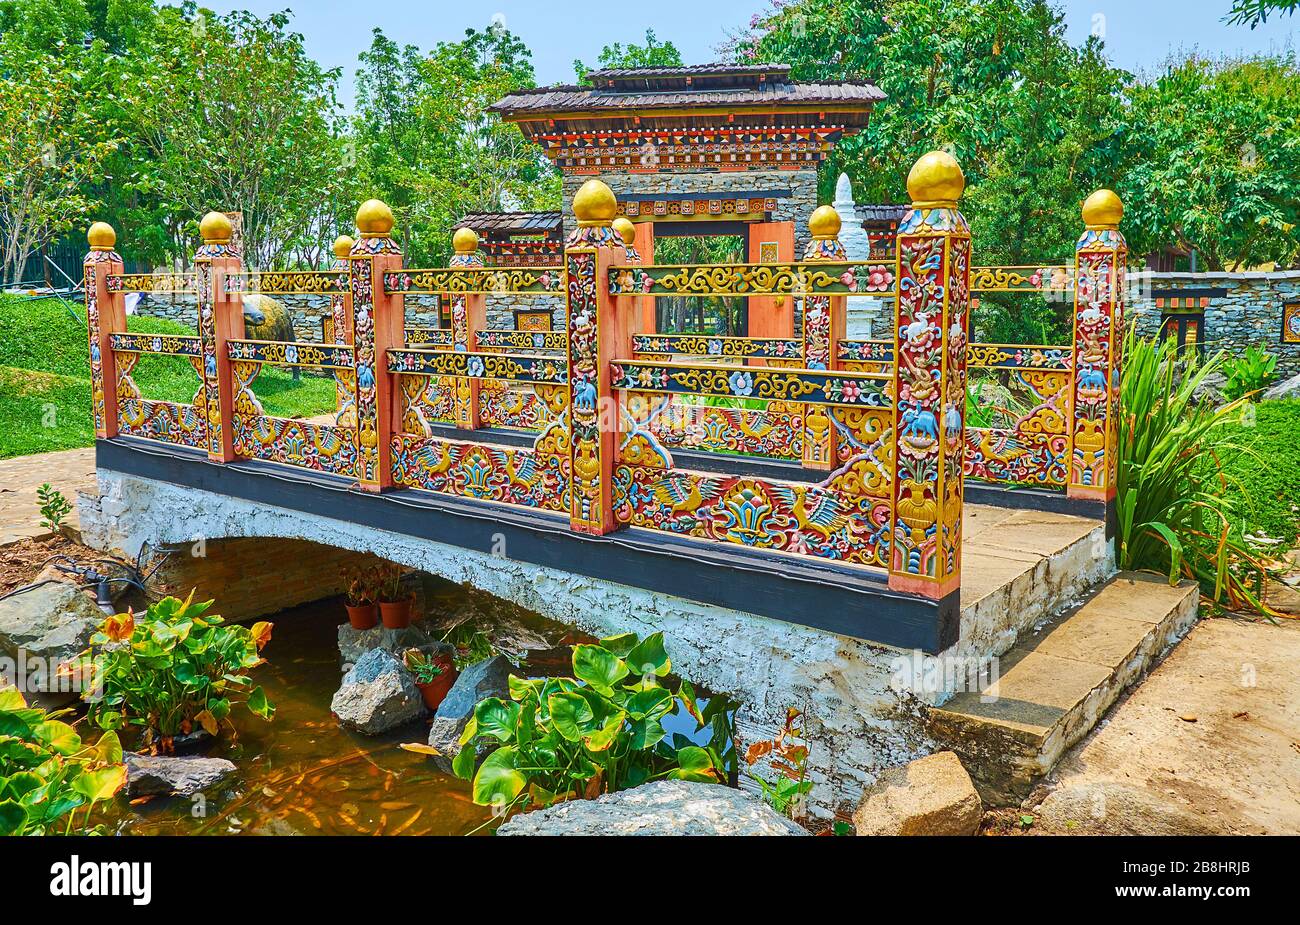 The richly decorated carved wooden bridge with floral and animalistic elements, traditional Thai and Bhutanese flowers of golden shower and blue poppy Stock Photo